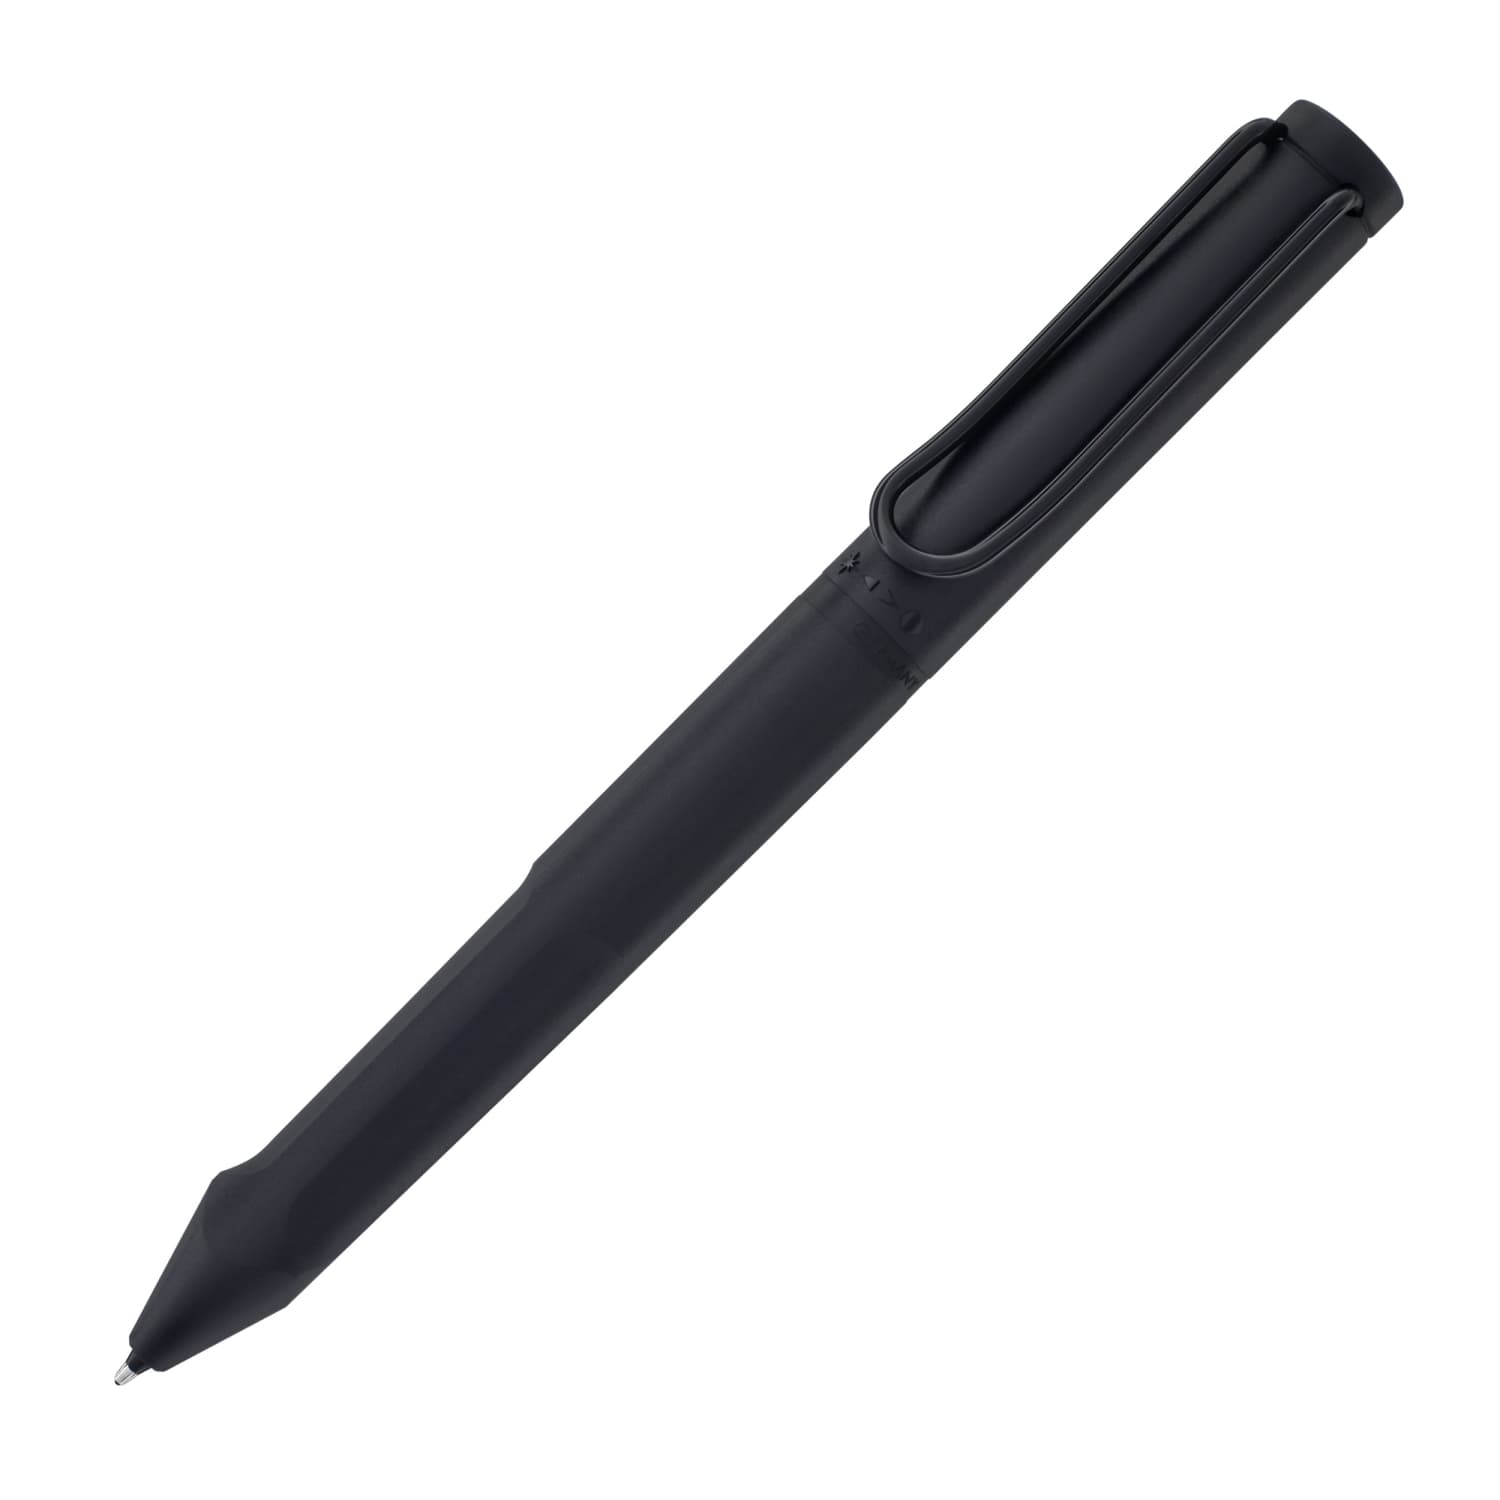 Pens for New Writers - Blog